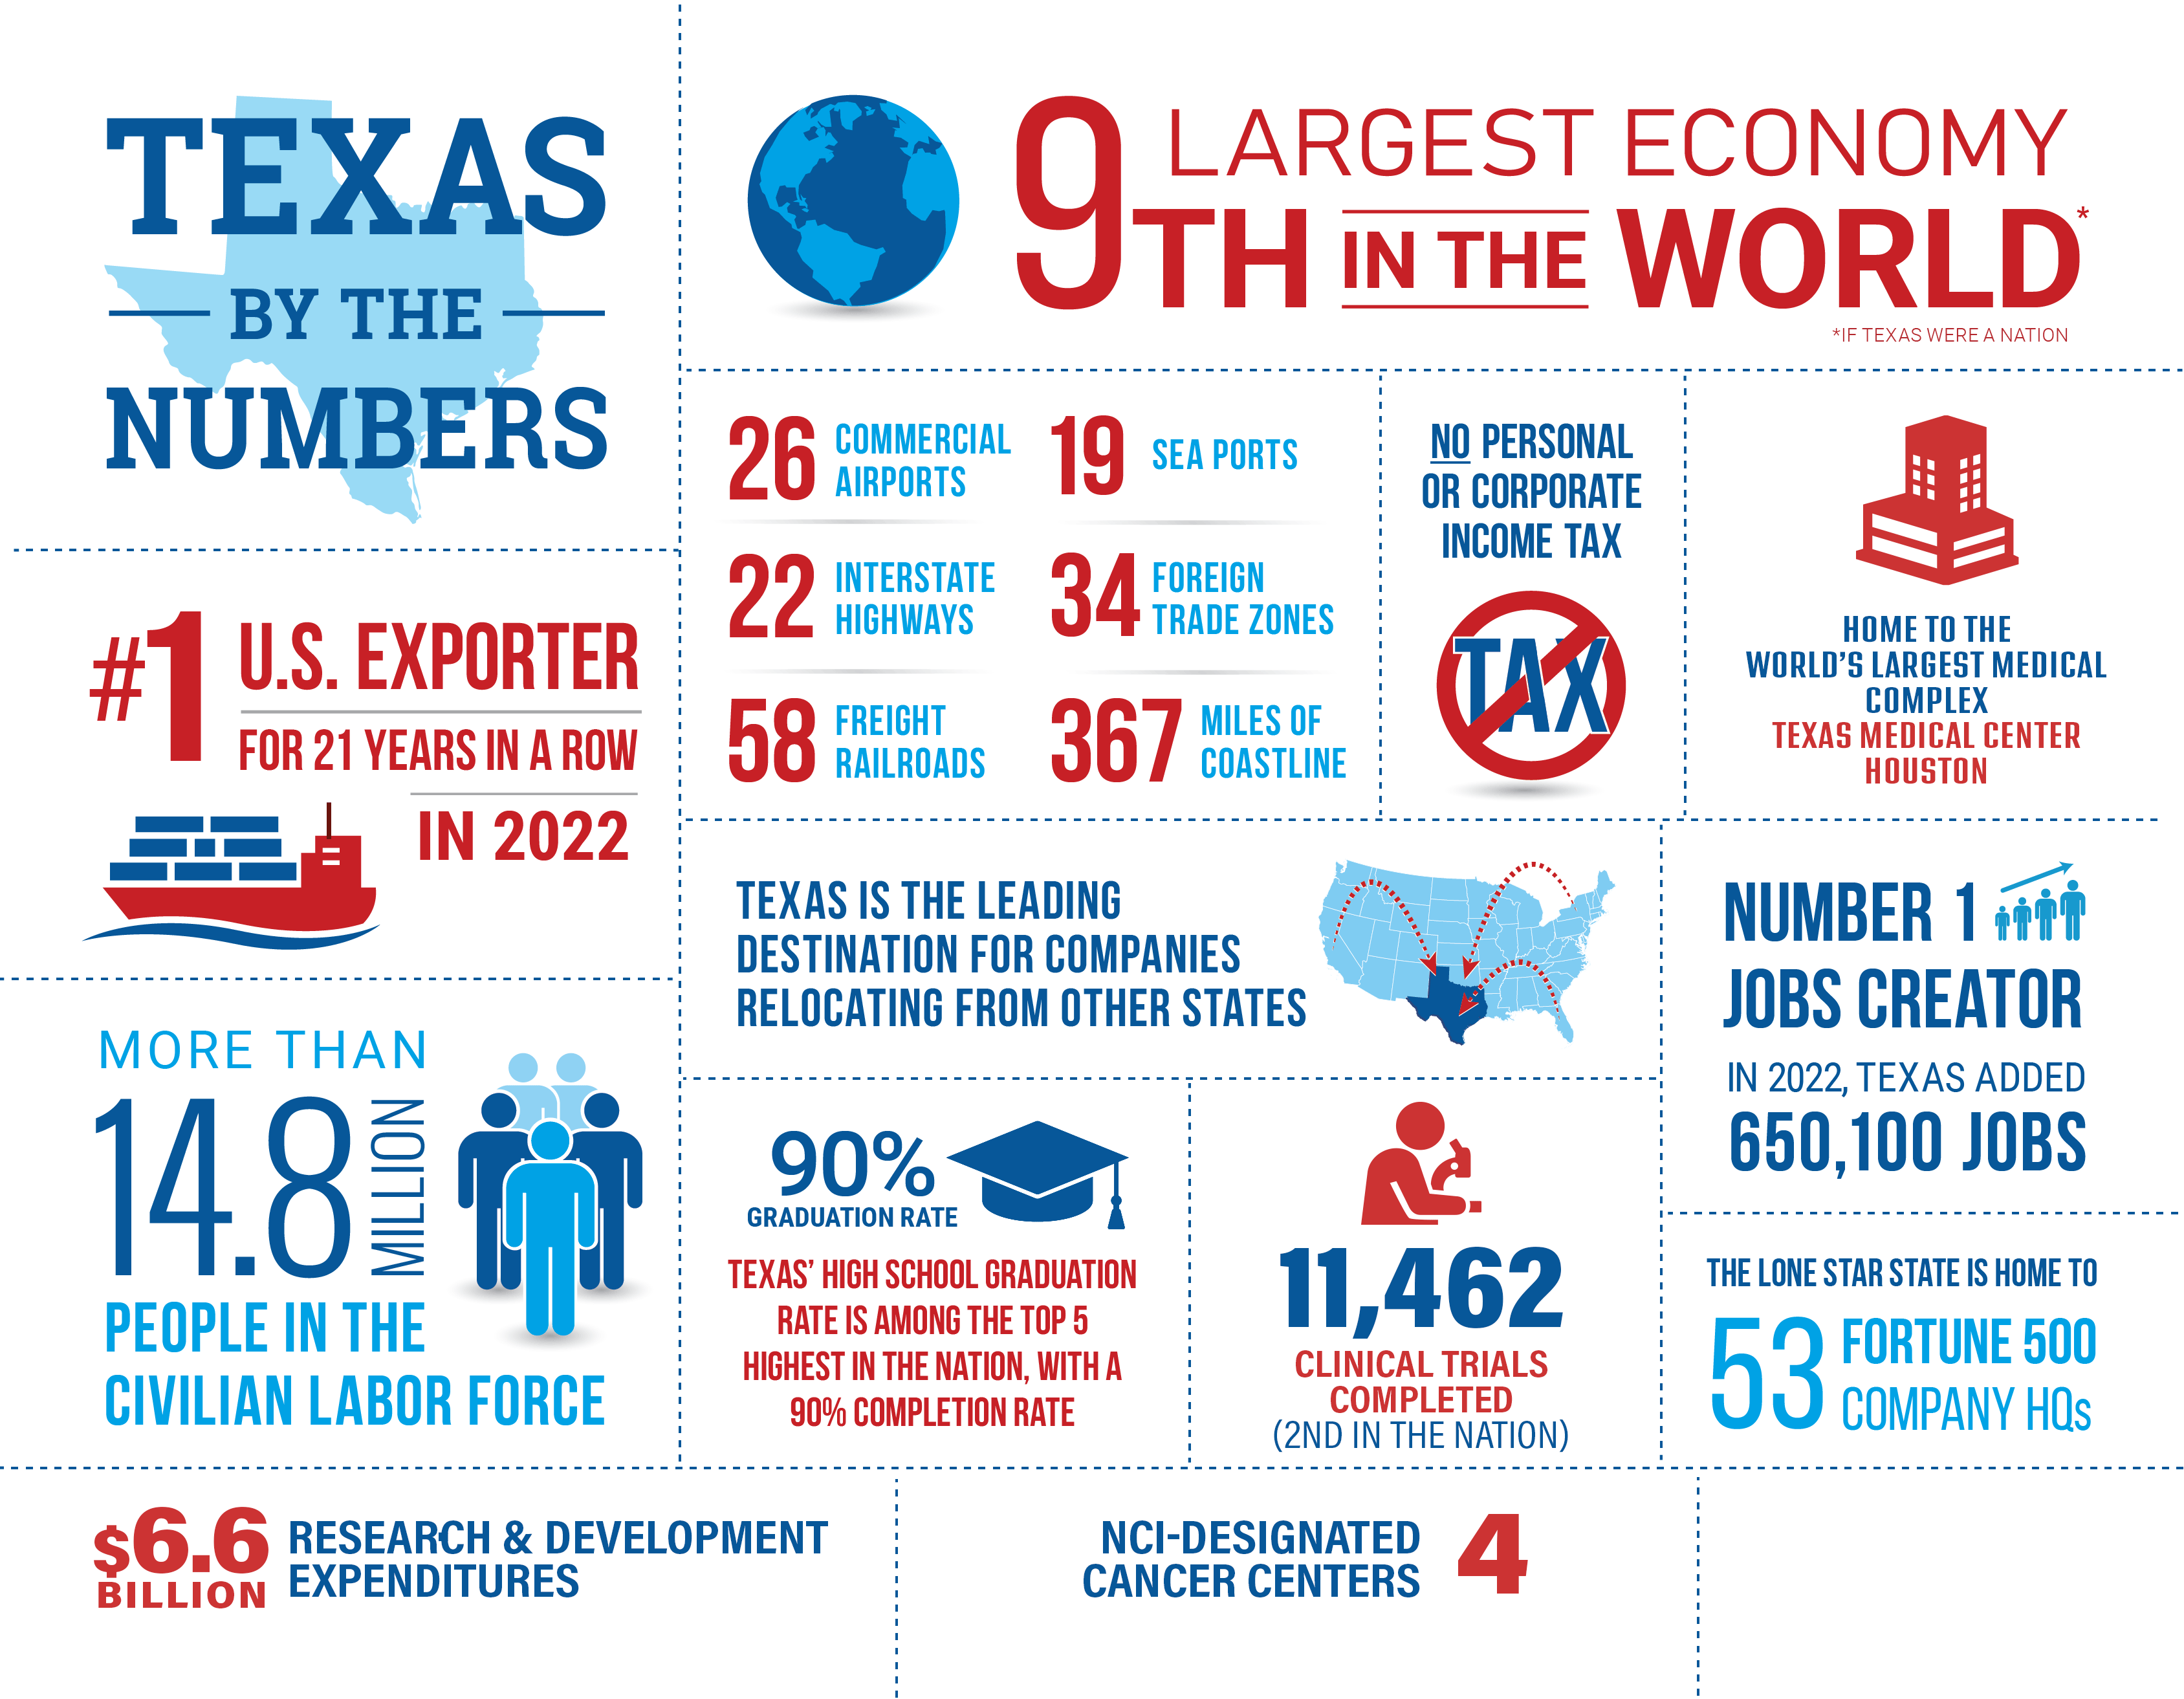 Texas by the Numbers